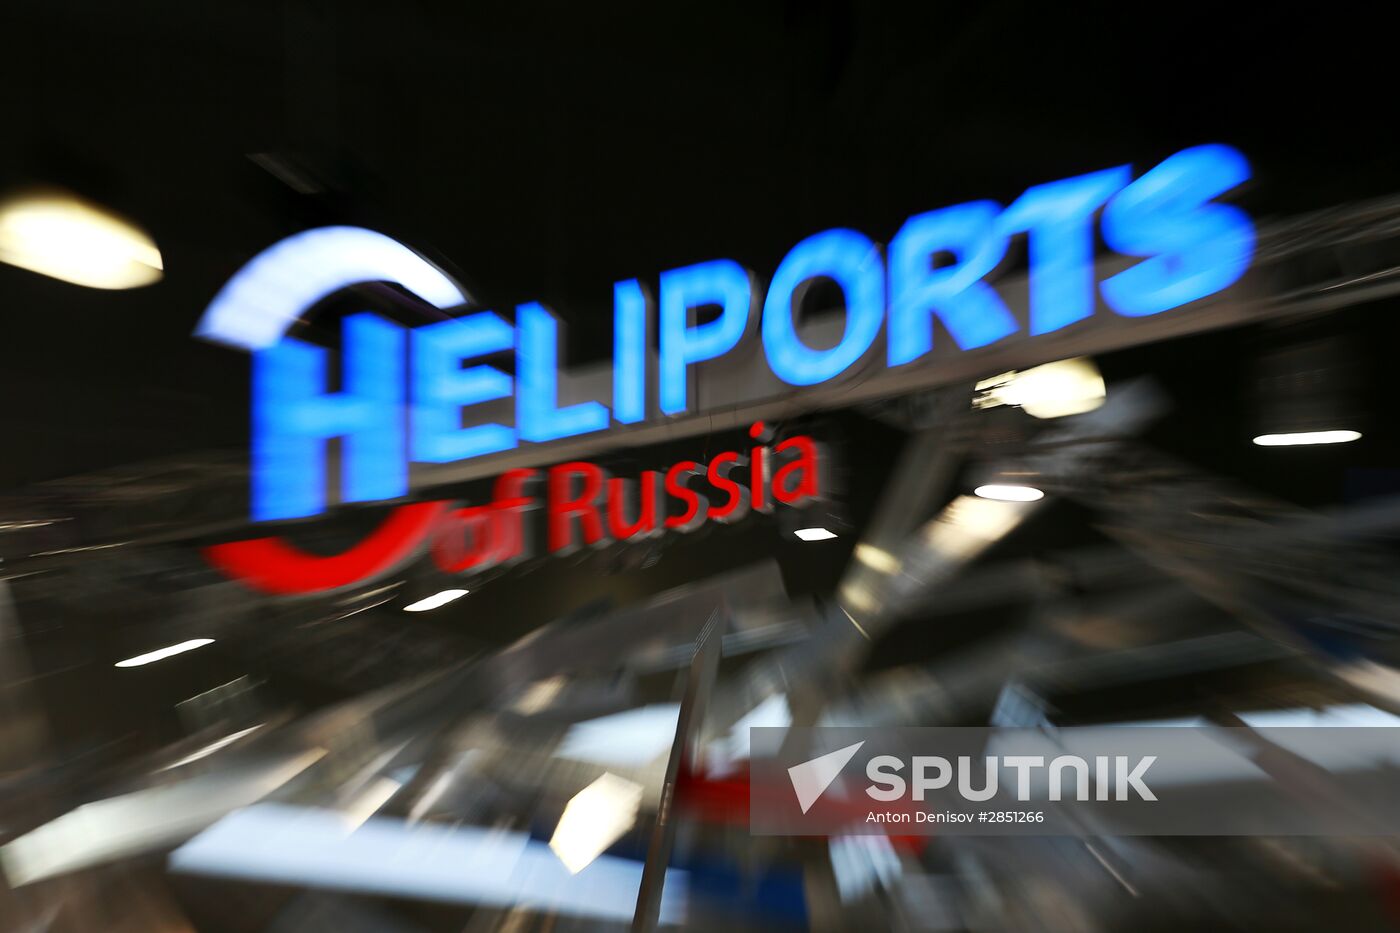 9th International HeliRussia helicopter industry exhibition 2016